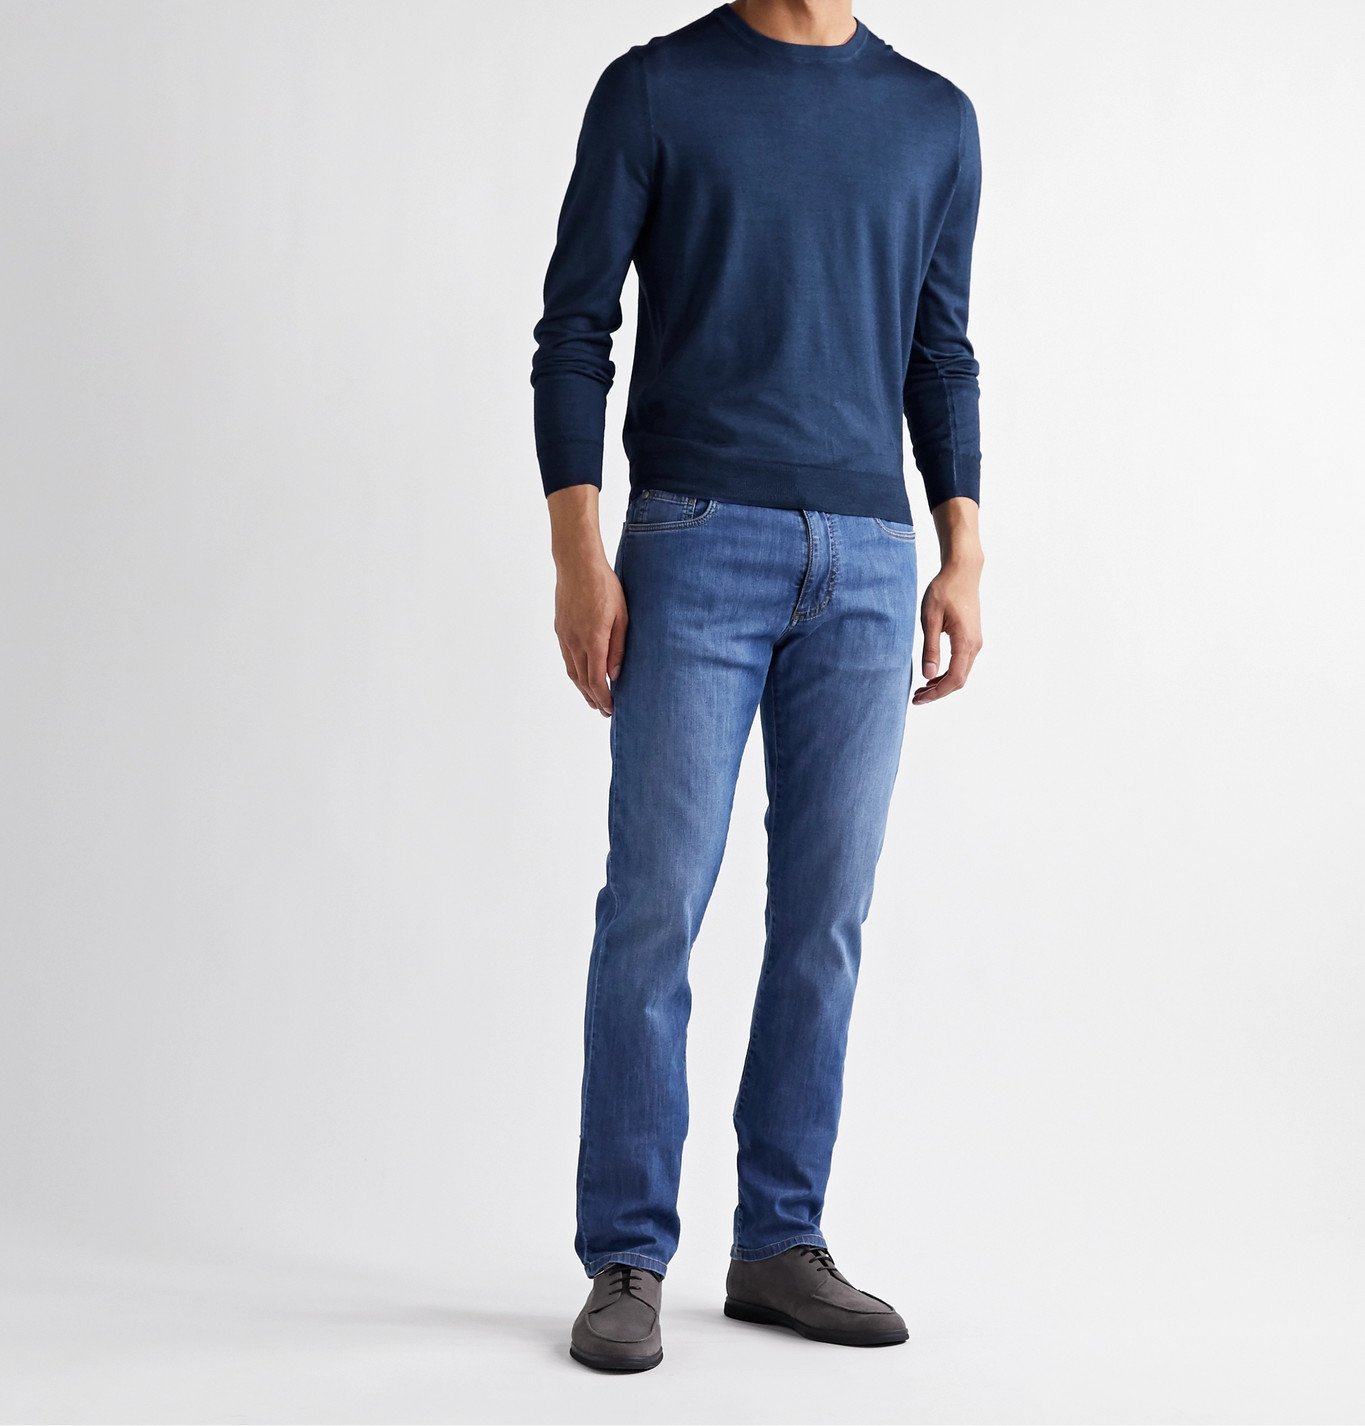 CANALI - Wool and Silk-Blend Sweater - Blue Canali